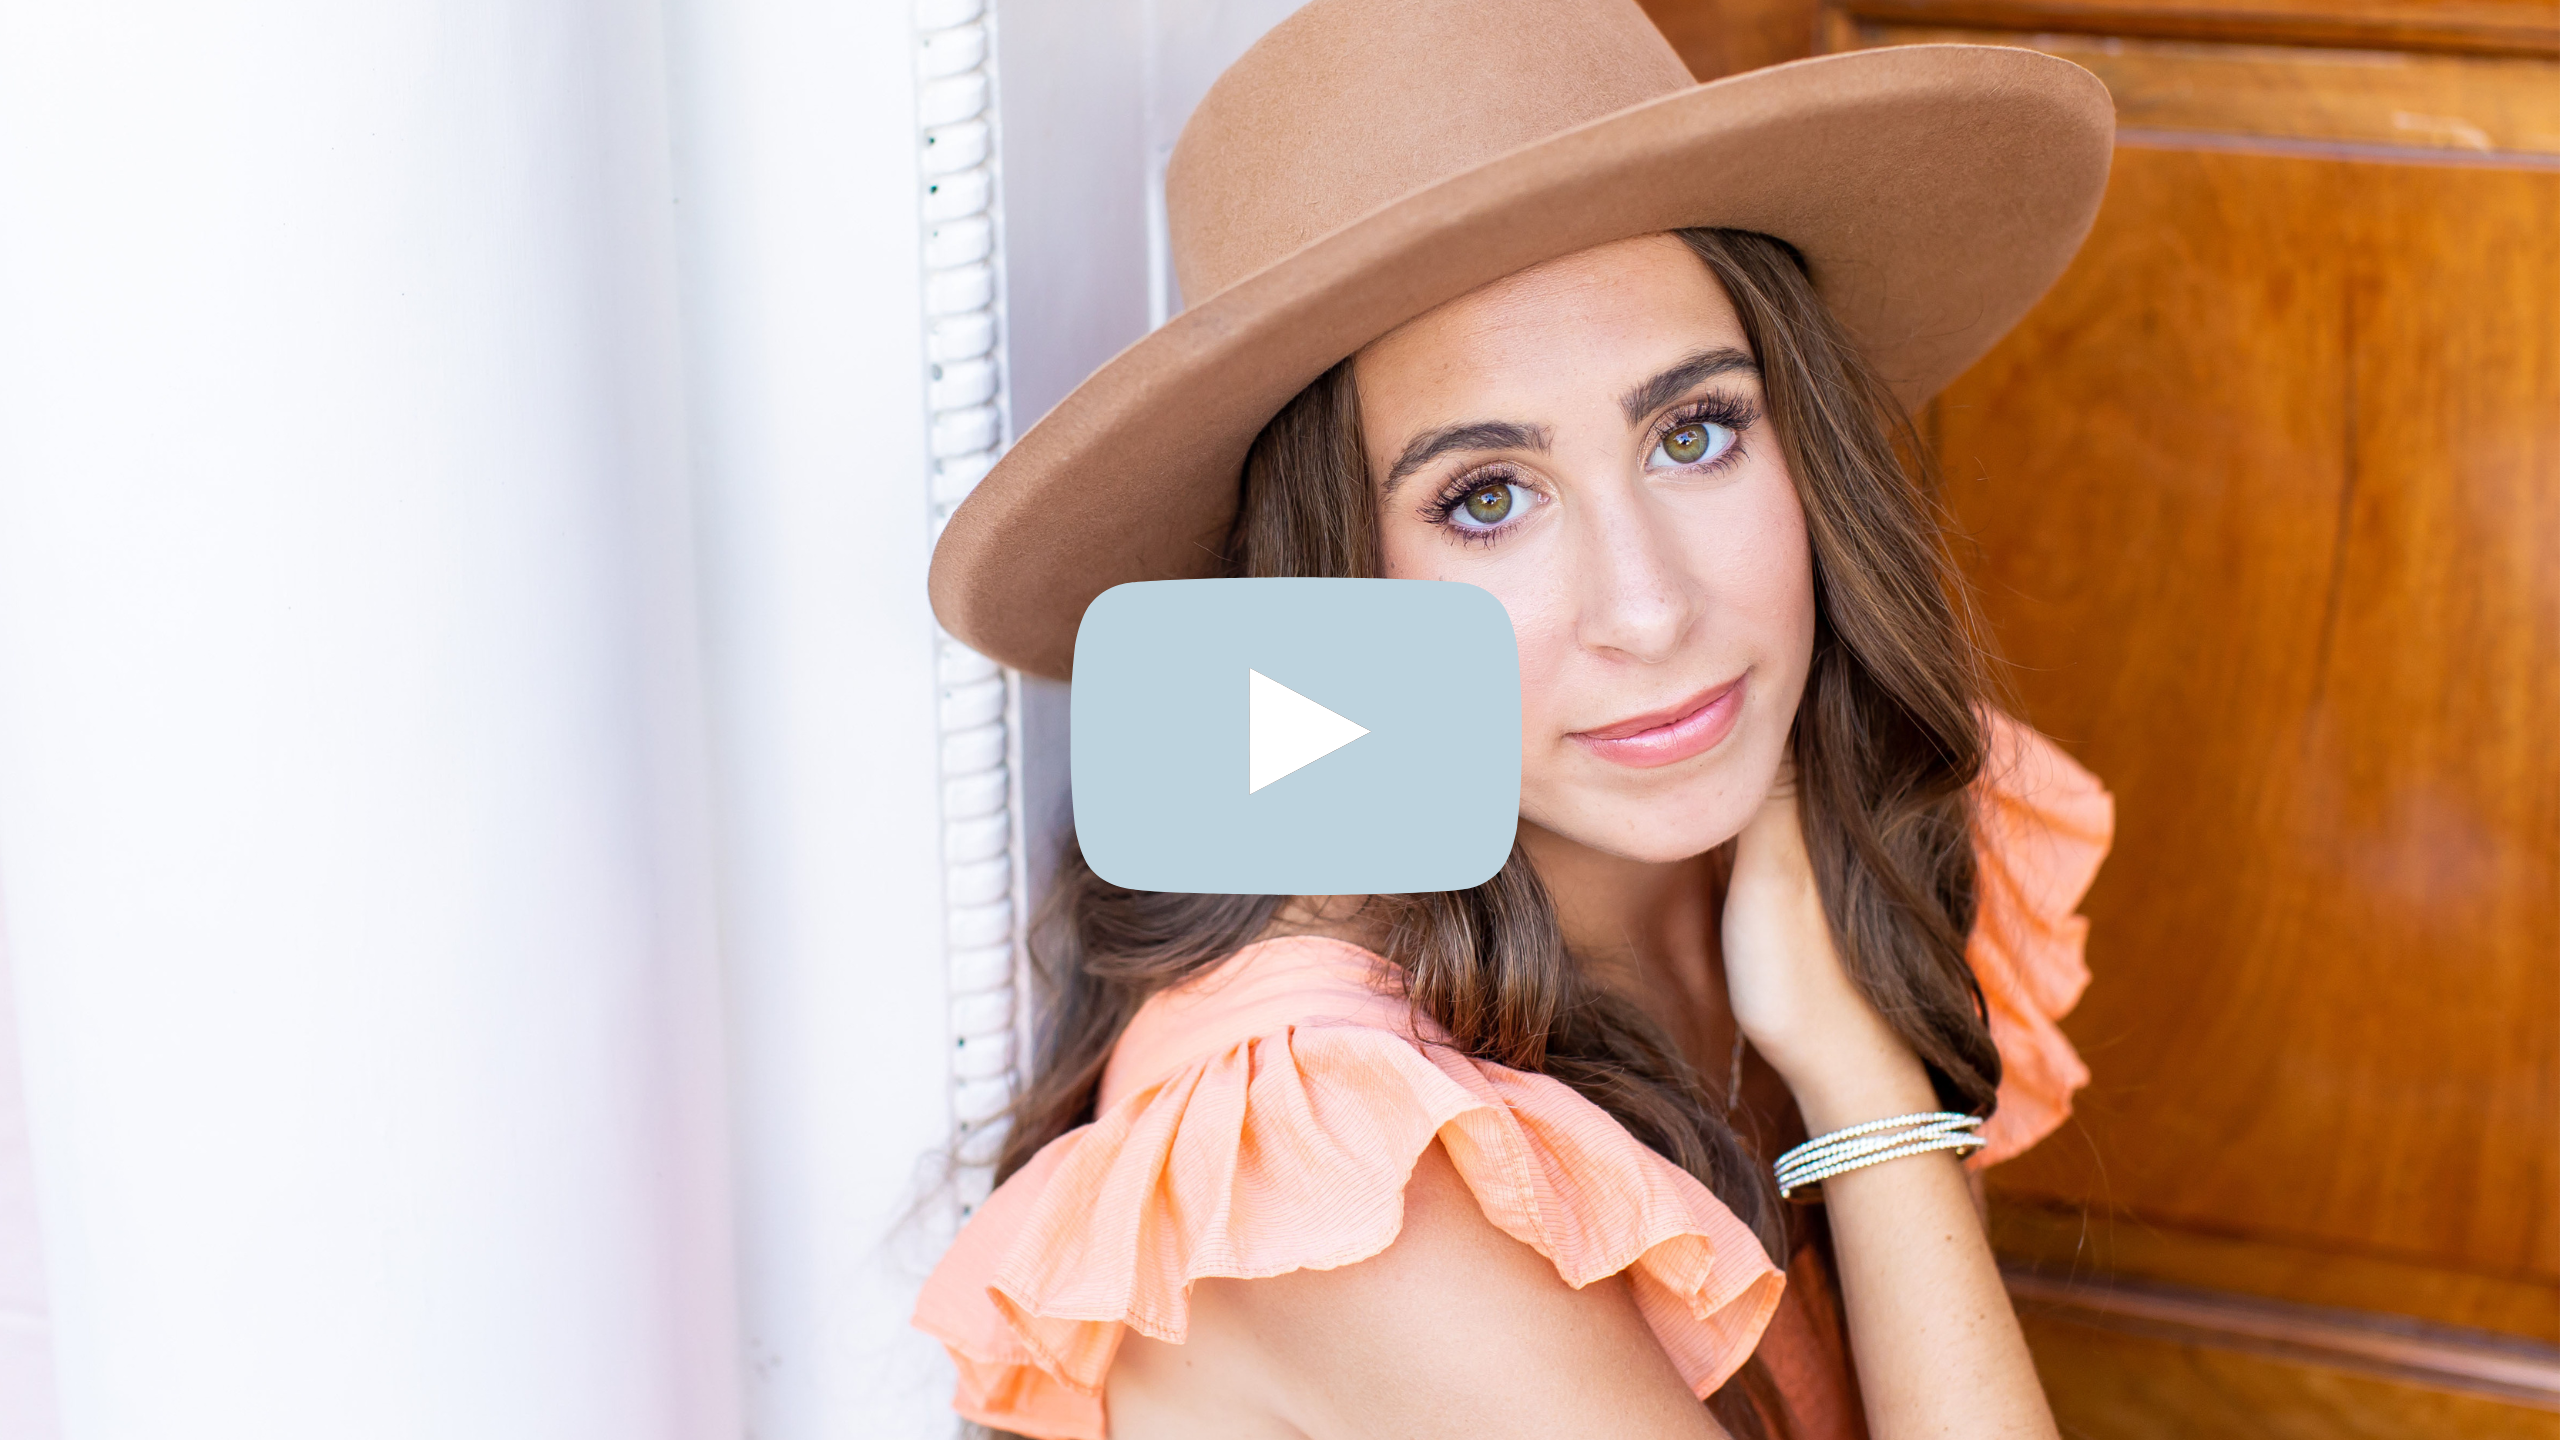 Watch me Photograph a FULL SENIOR SESSION | Hope Taylor Photography